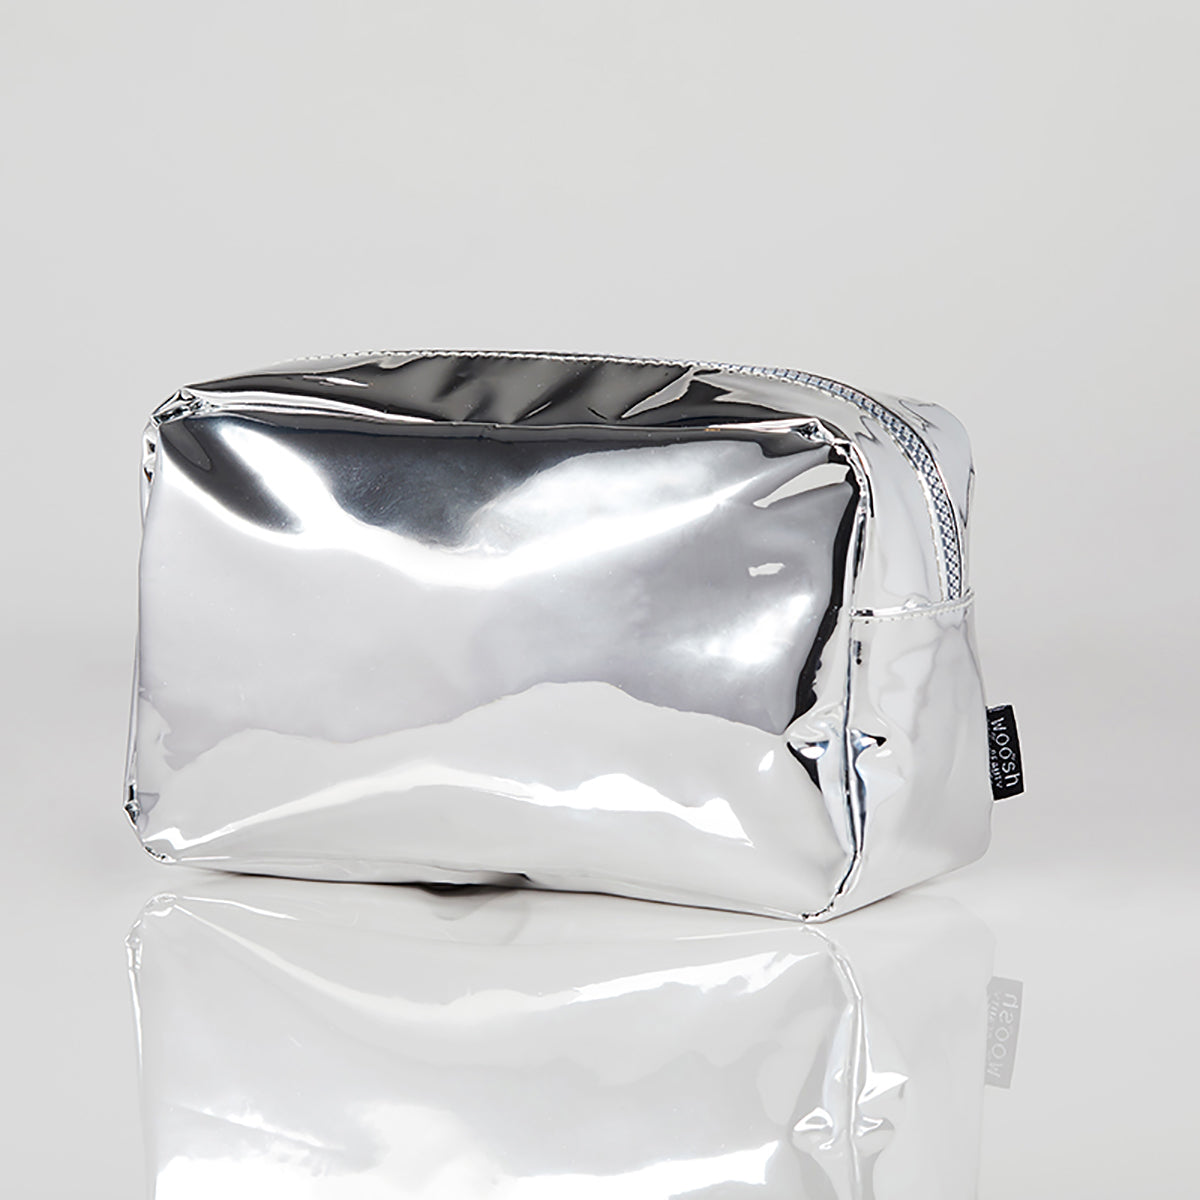 Metallic silver vegan essential makeup back with large zipper by Woosh Beauty